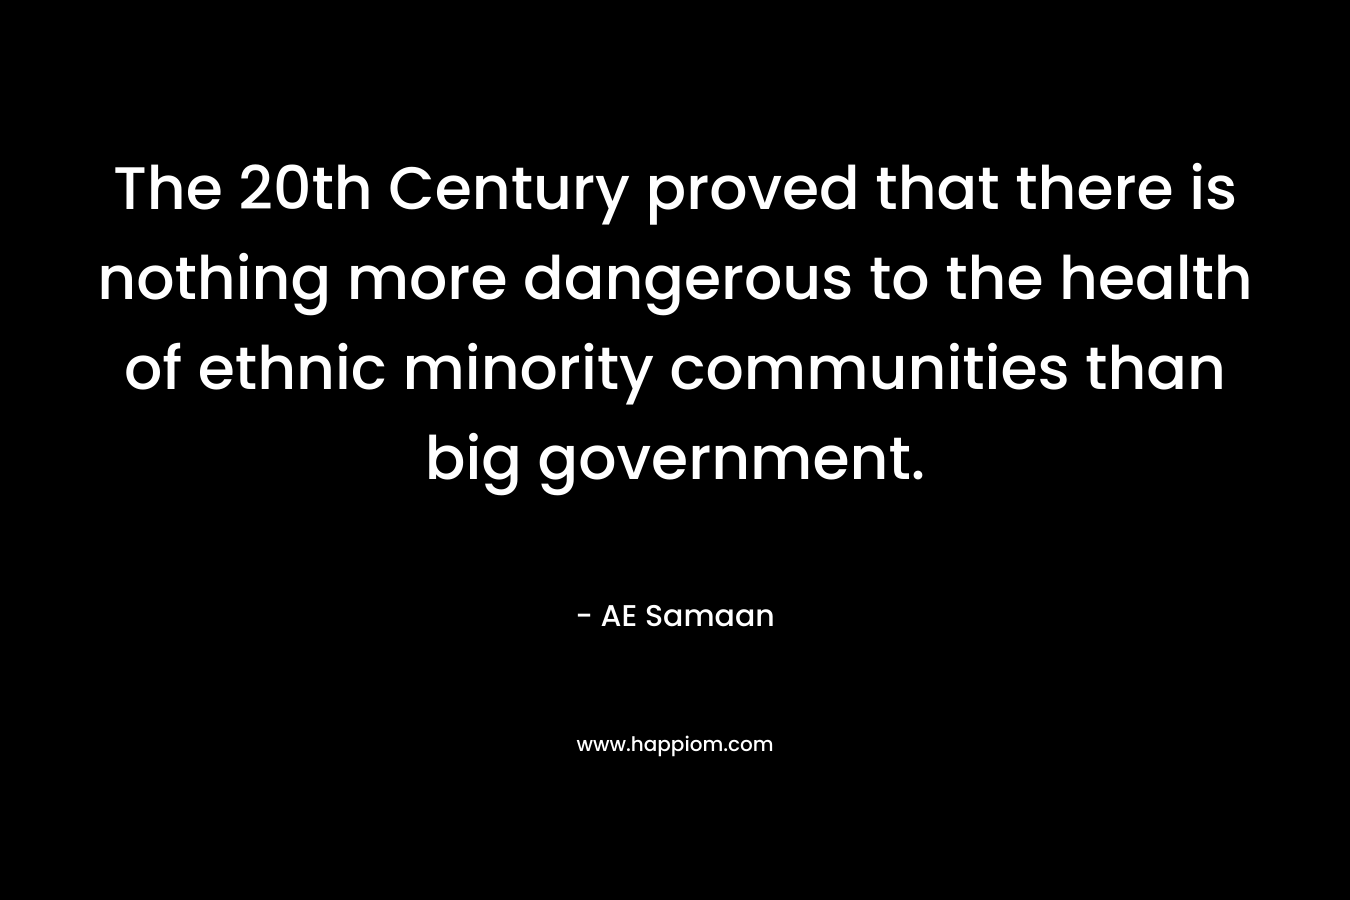 The 20th Century proved that there is nothing more dangerous to the health of ethnic minority communities than big government. – AE Samaan